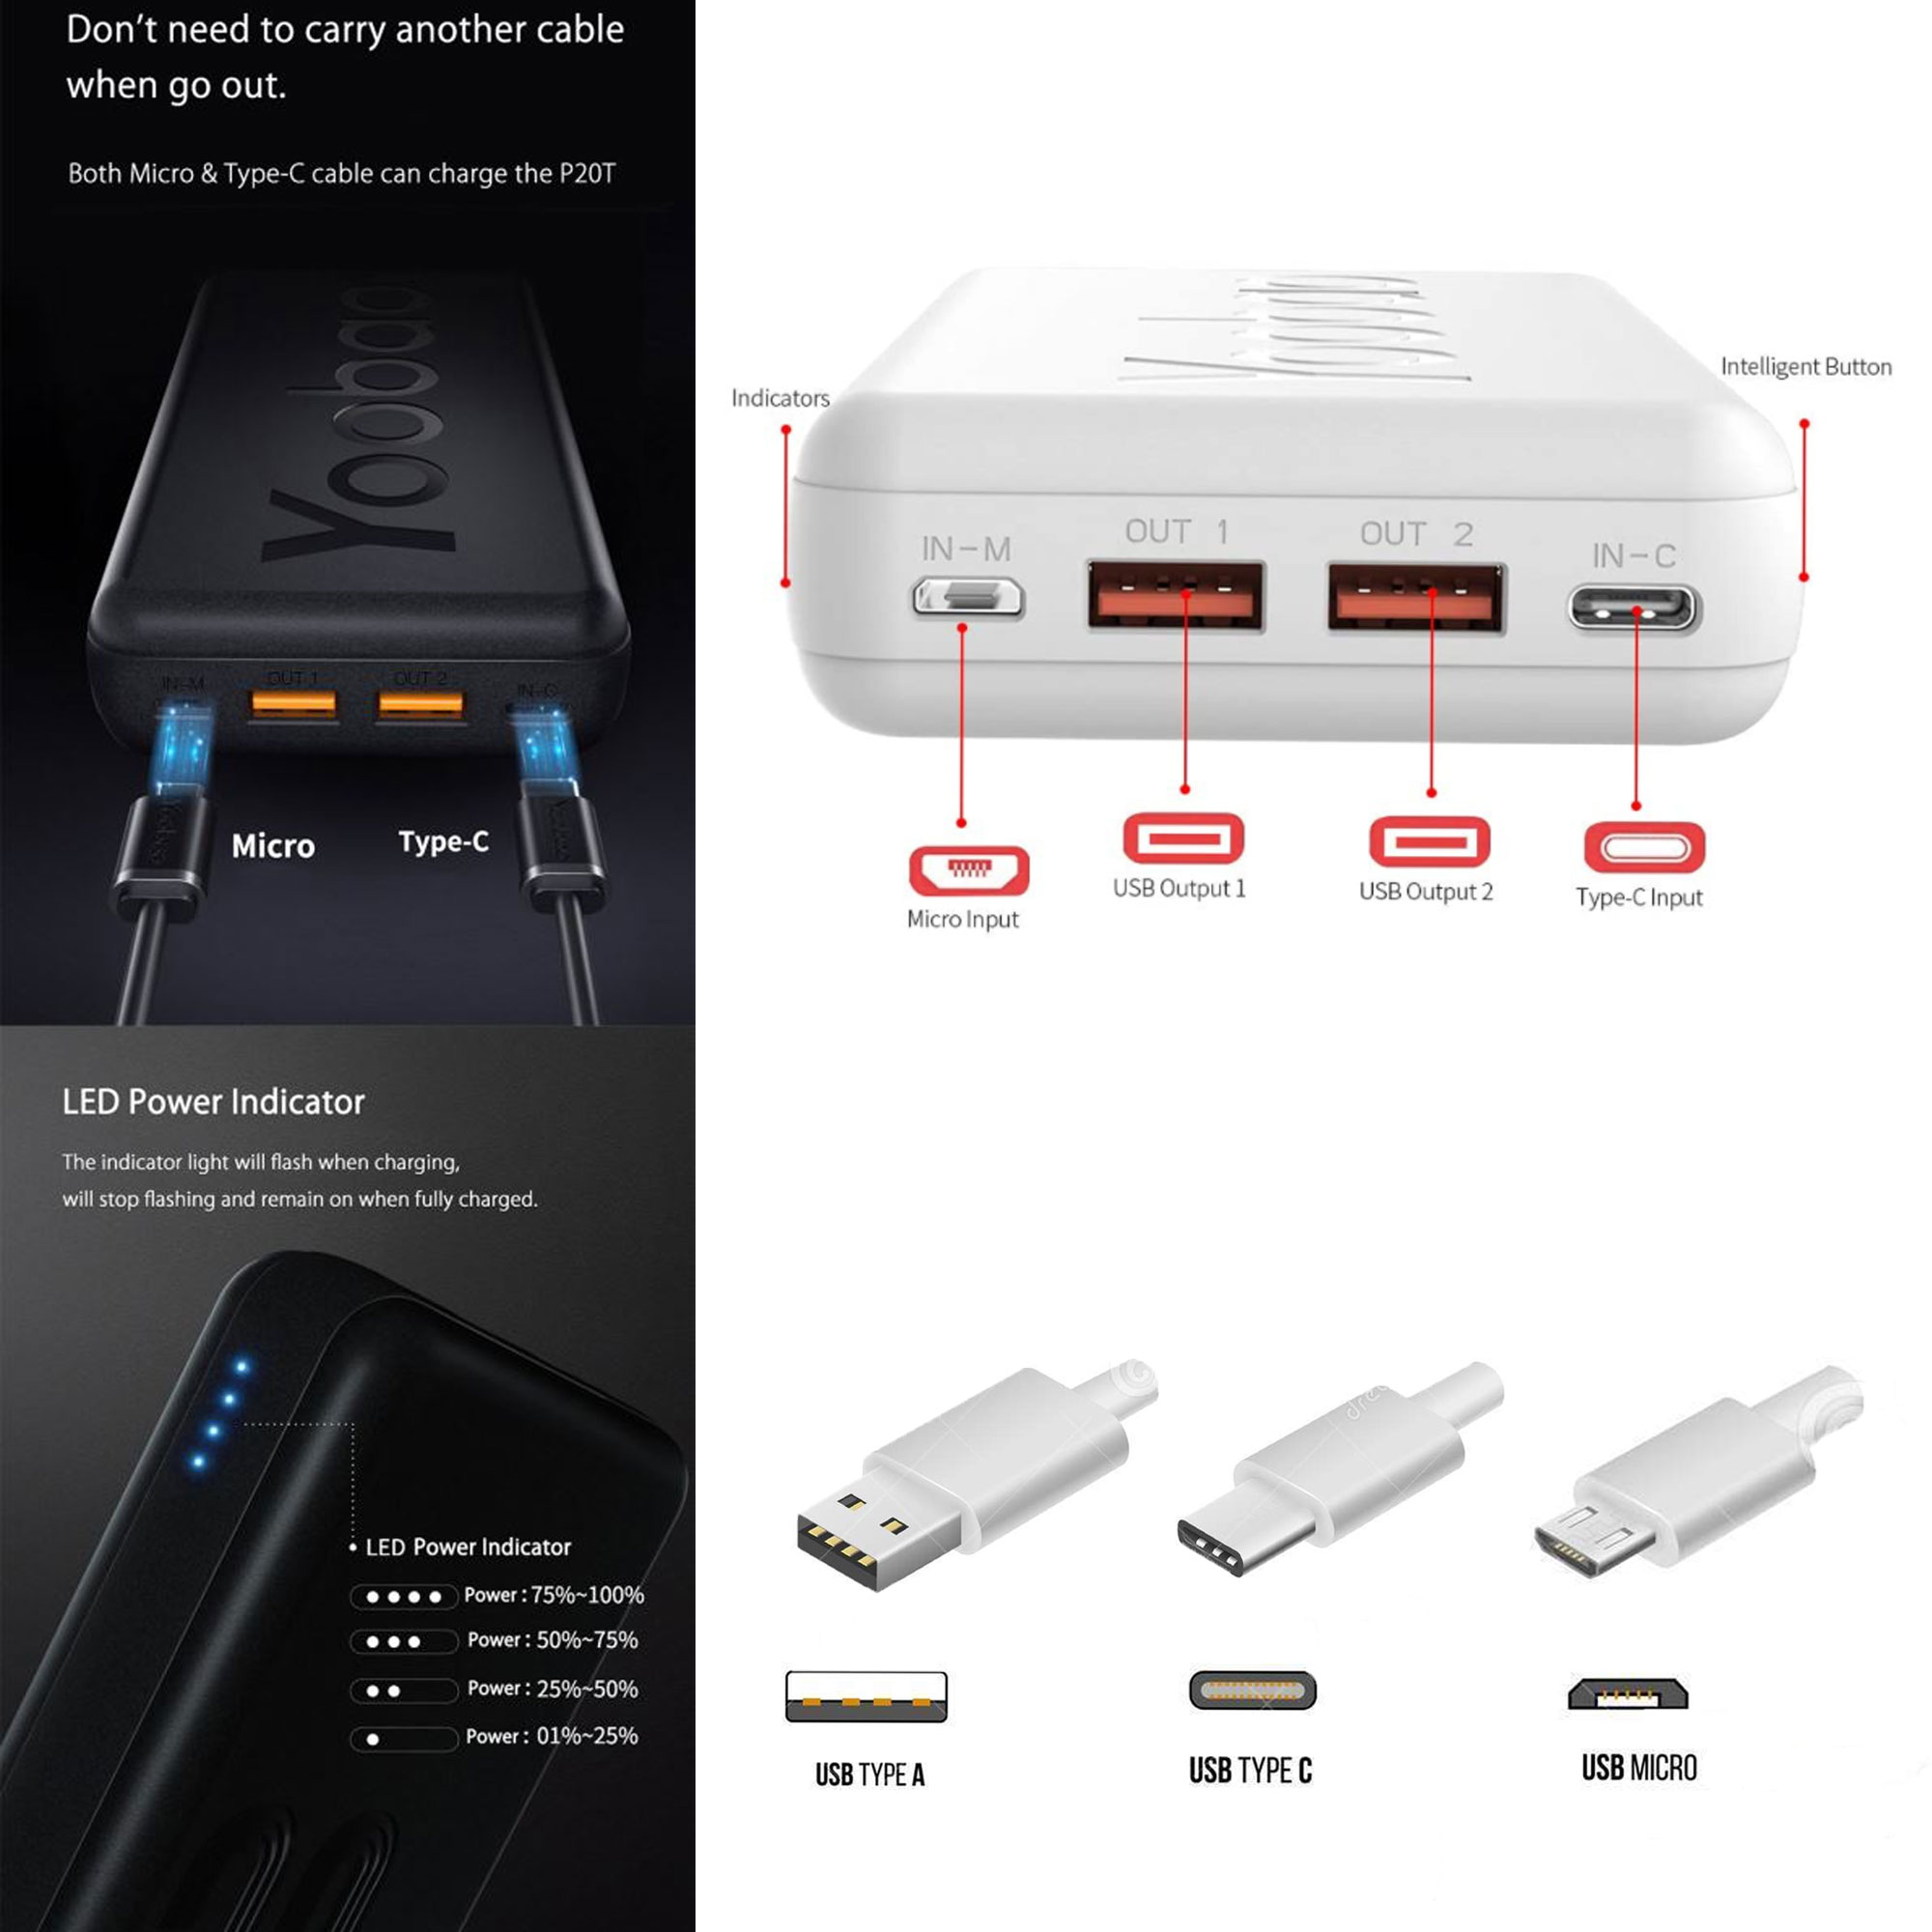 Power Mower Sales Portable Battery Backup Charger 20000mAh External Power Bank iPhone Samsung Android Google OnePlus Phones & More Micro USB USB-C